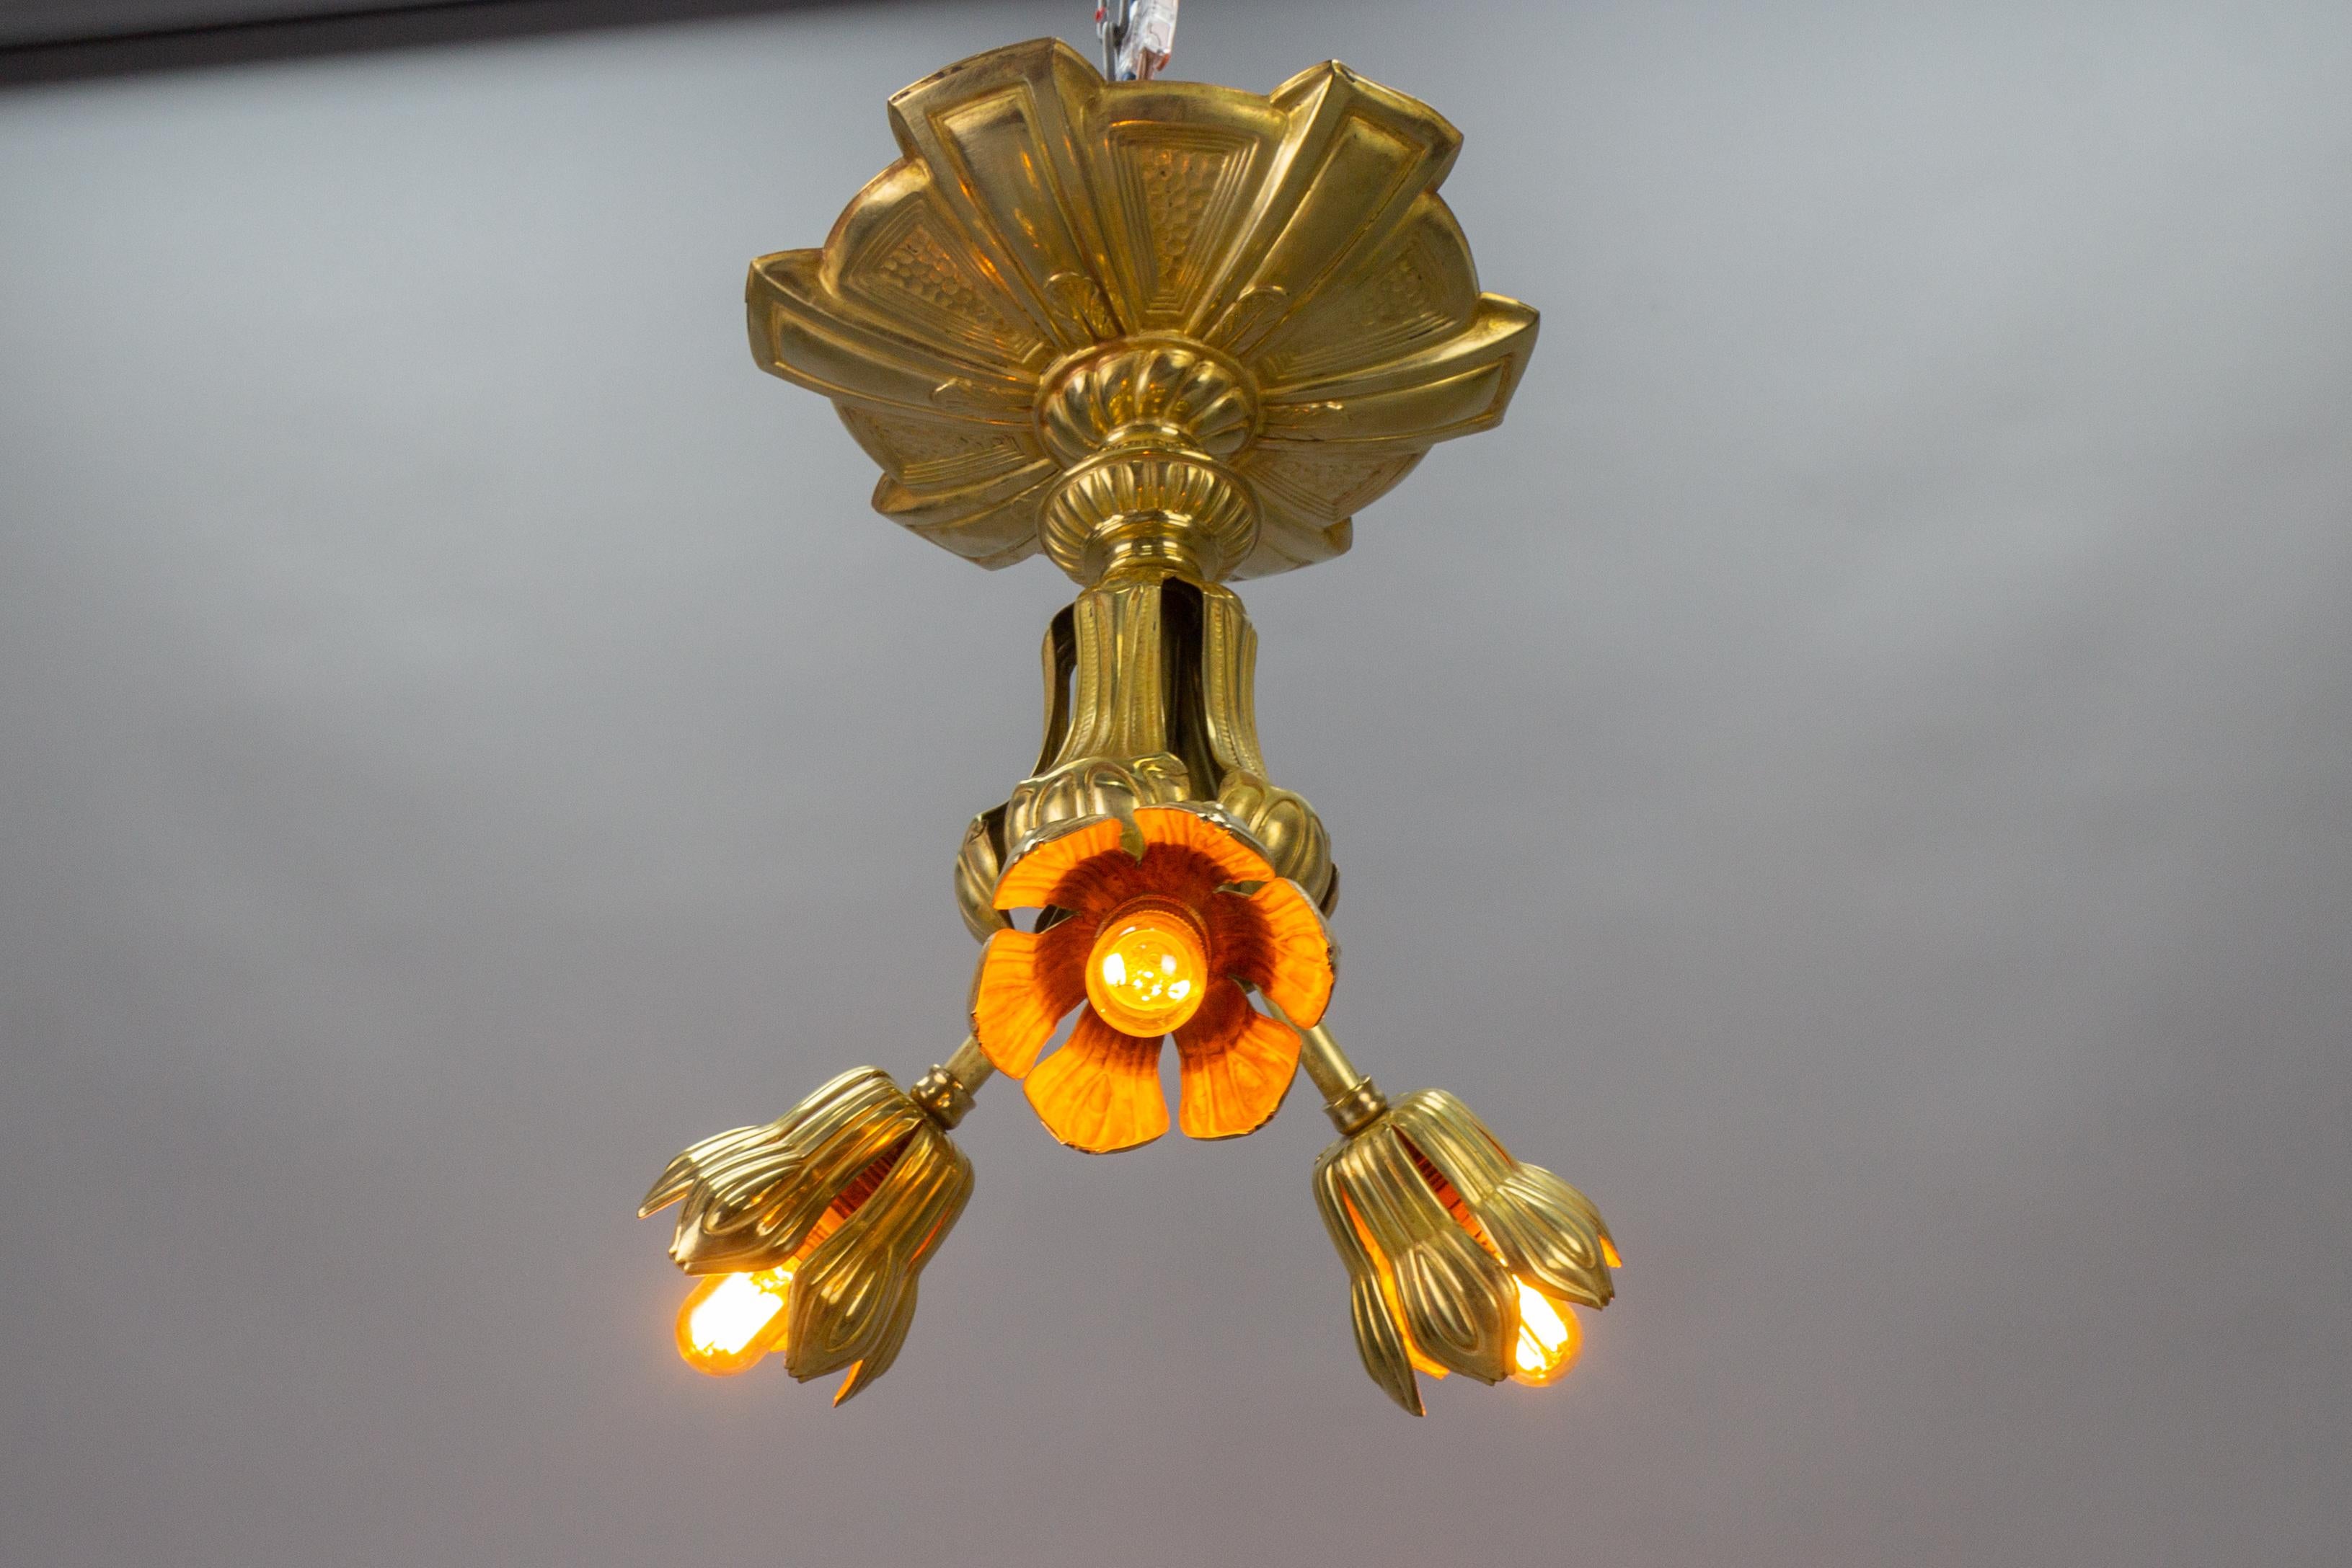  French Art Deco Three-Light Brass Ceiling Light Fixture, 1920s For Sale 5